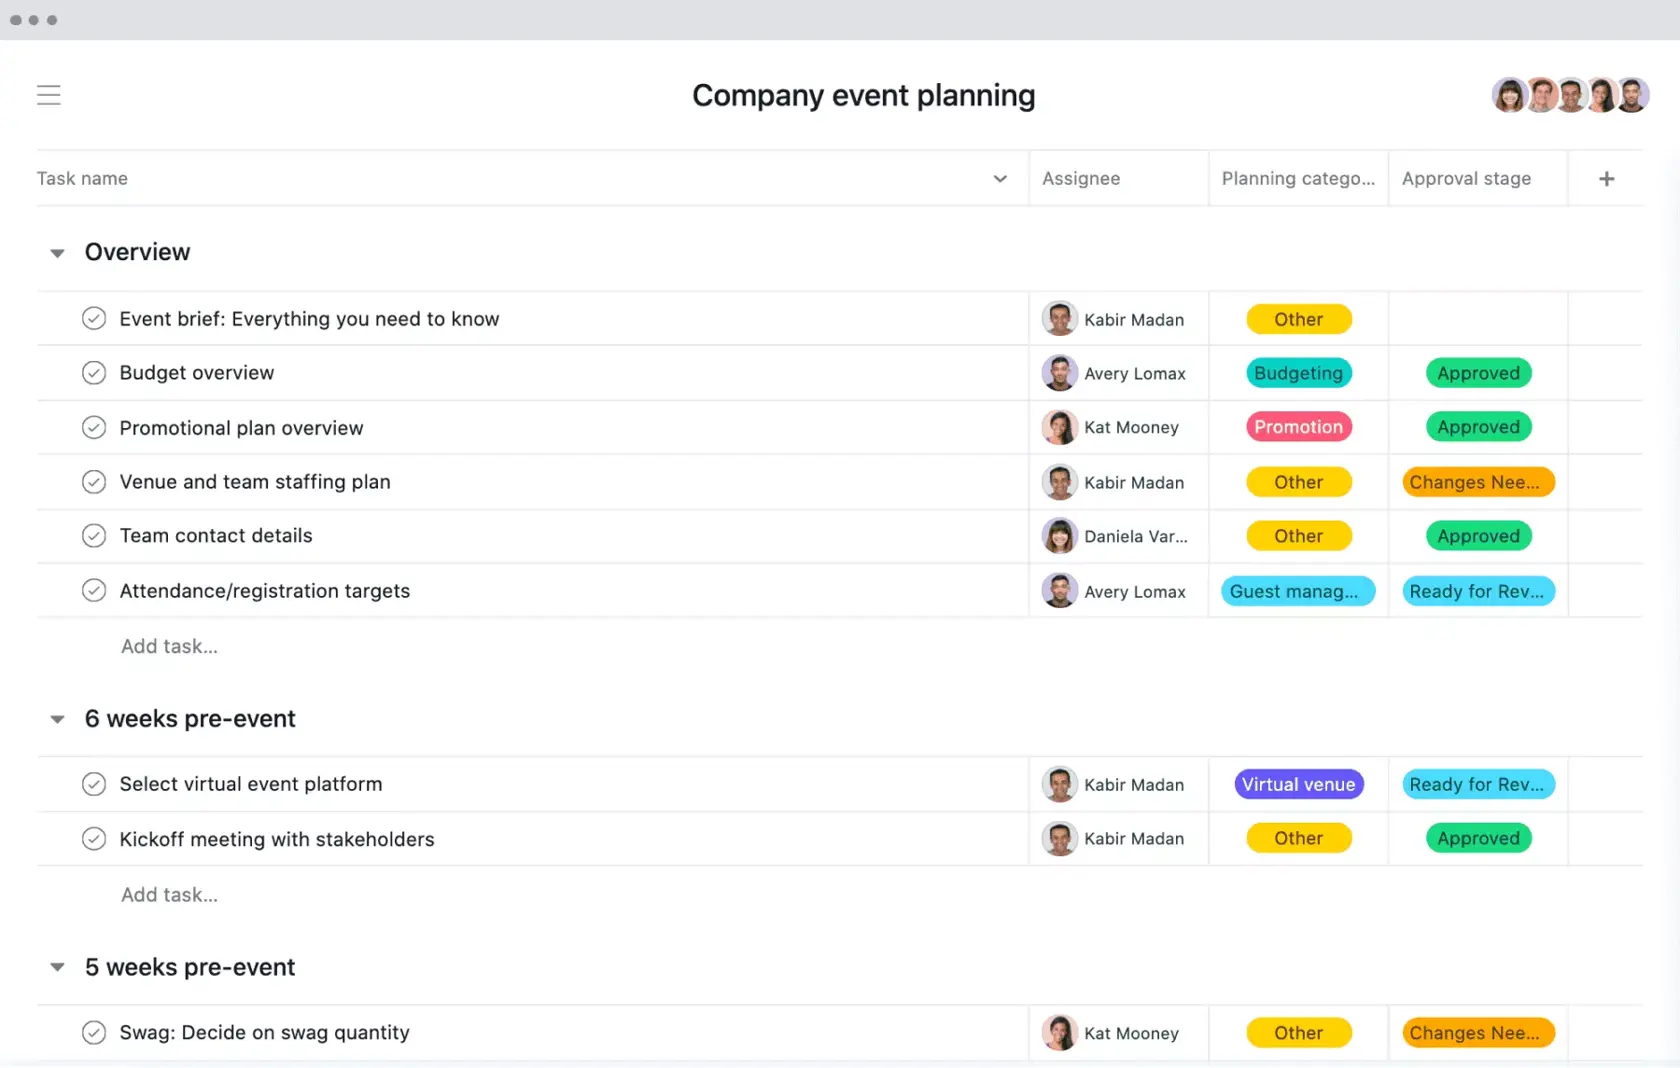 [Old Product UI] Company event planning project in Asana, spreadsheet-style view with project deliverables (Lists)